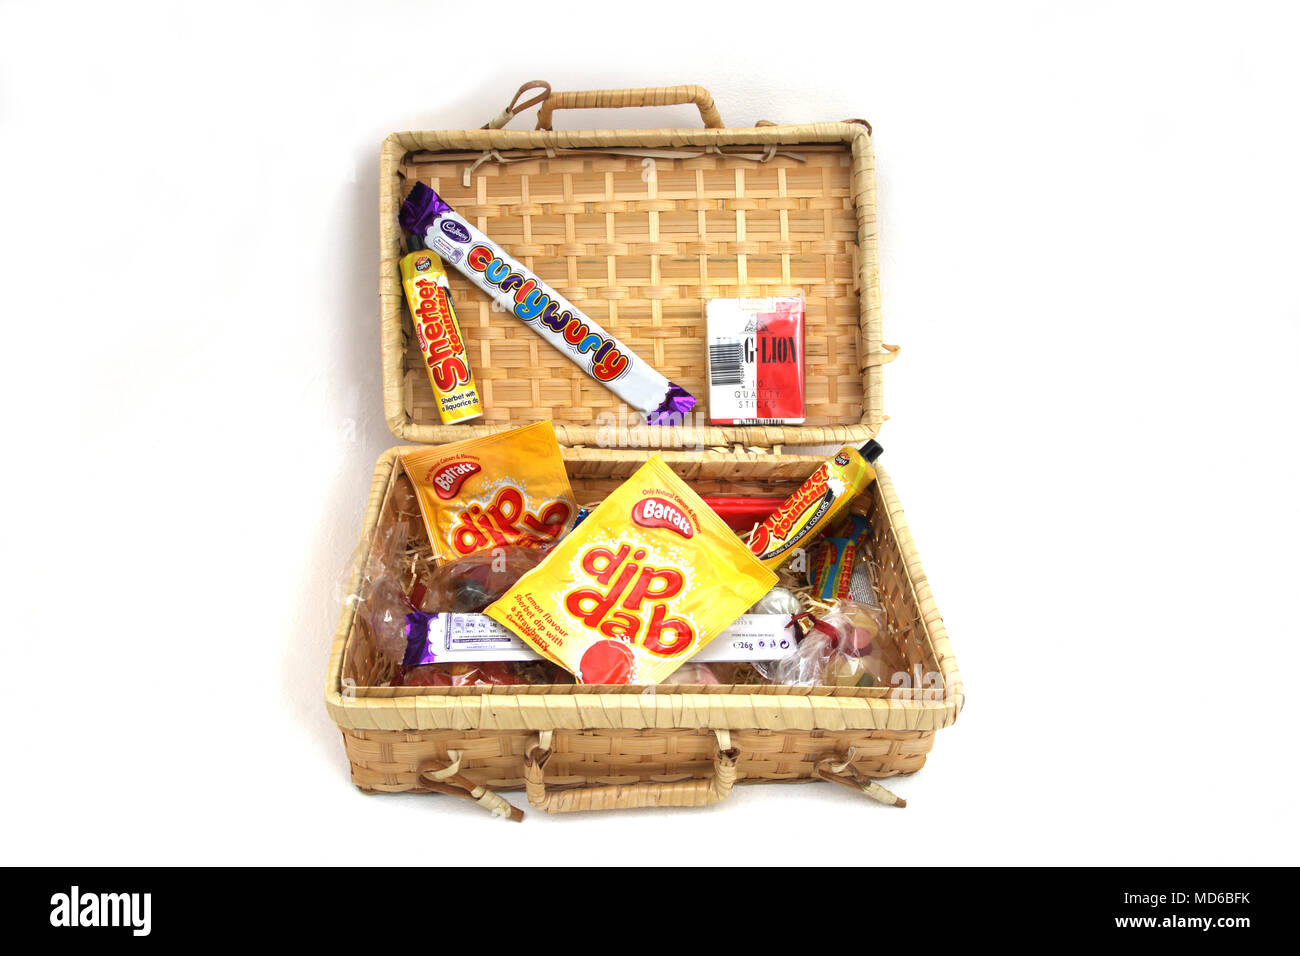 Hamper Filled With Retro Sweets and chocolate Stock Photo